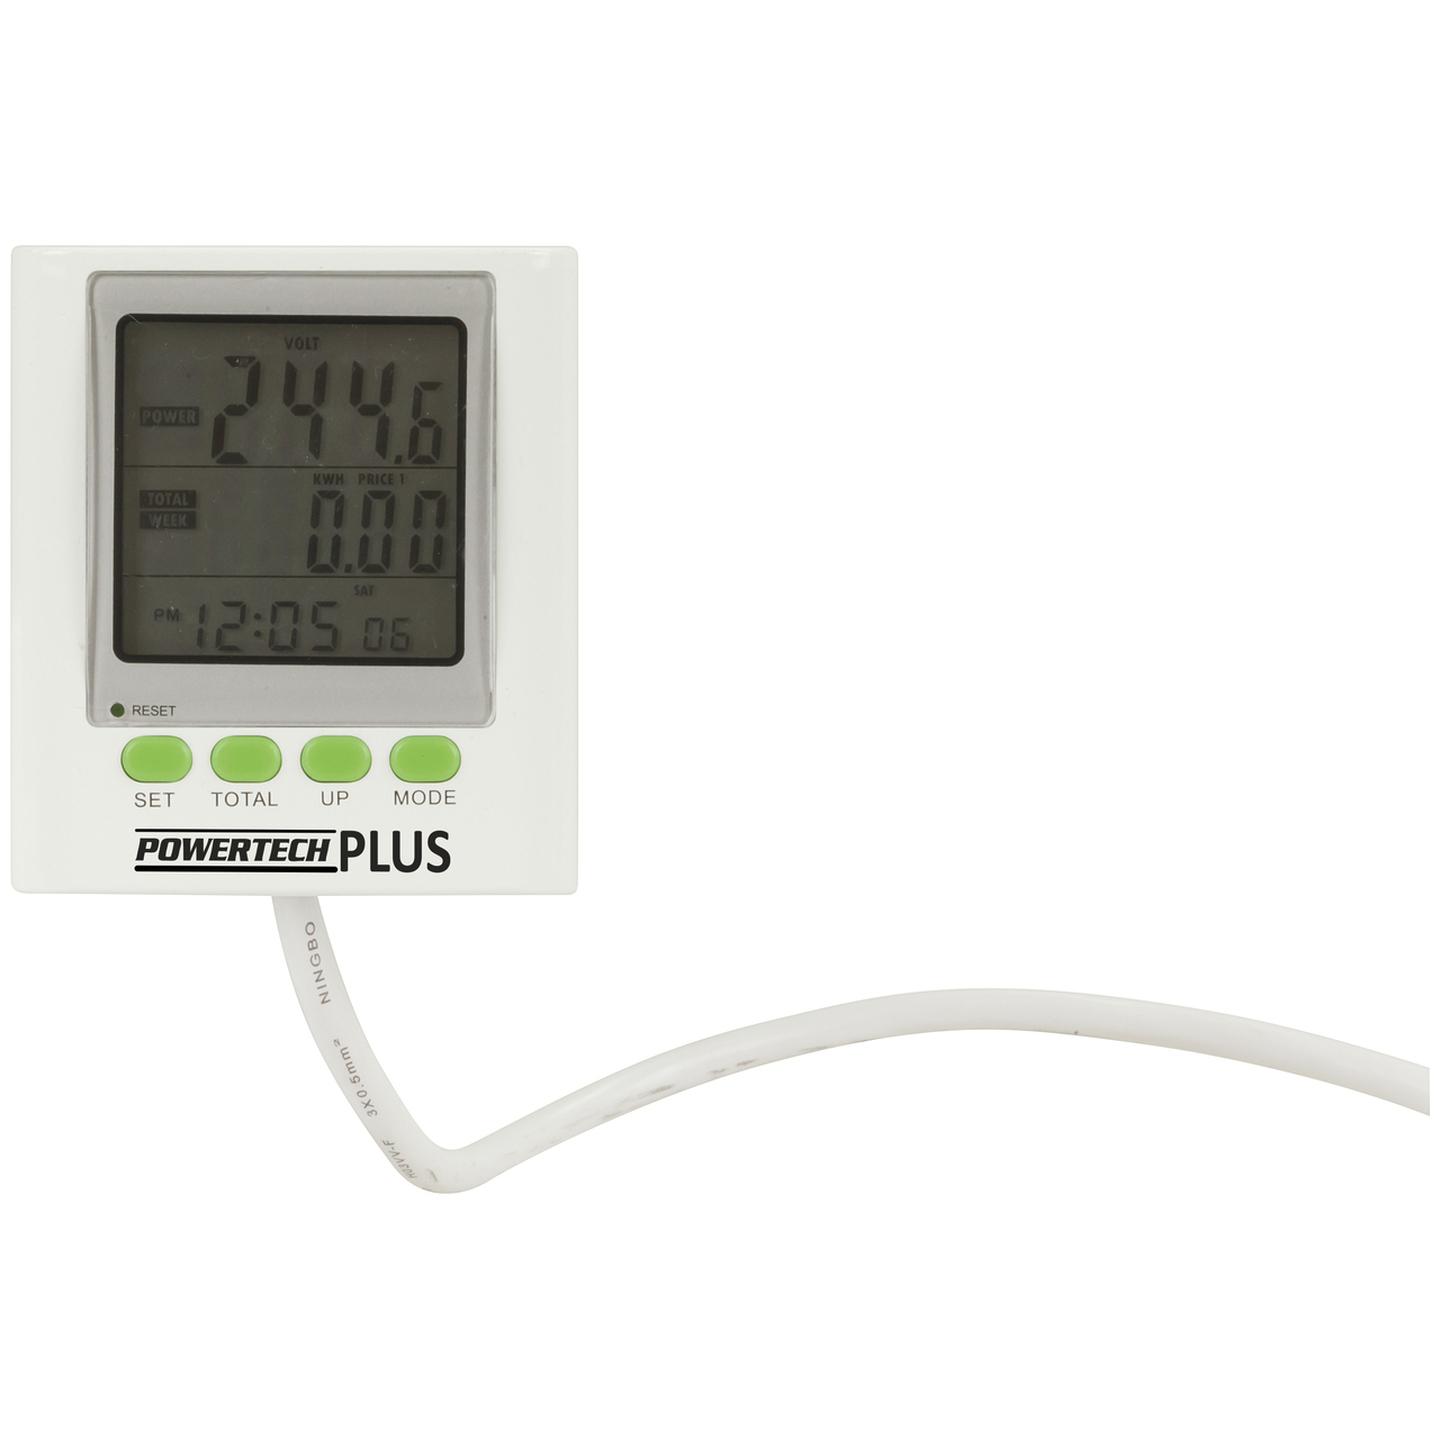 Mains Power Meter with extendable LCD Display